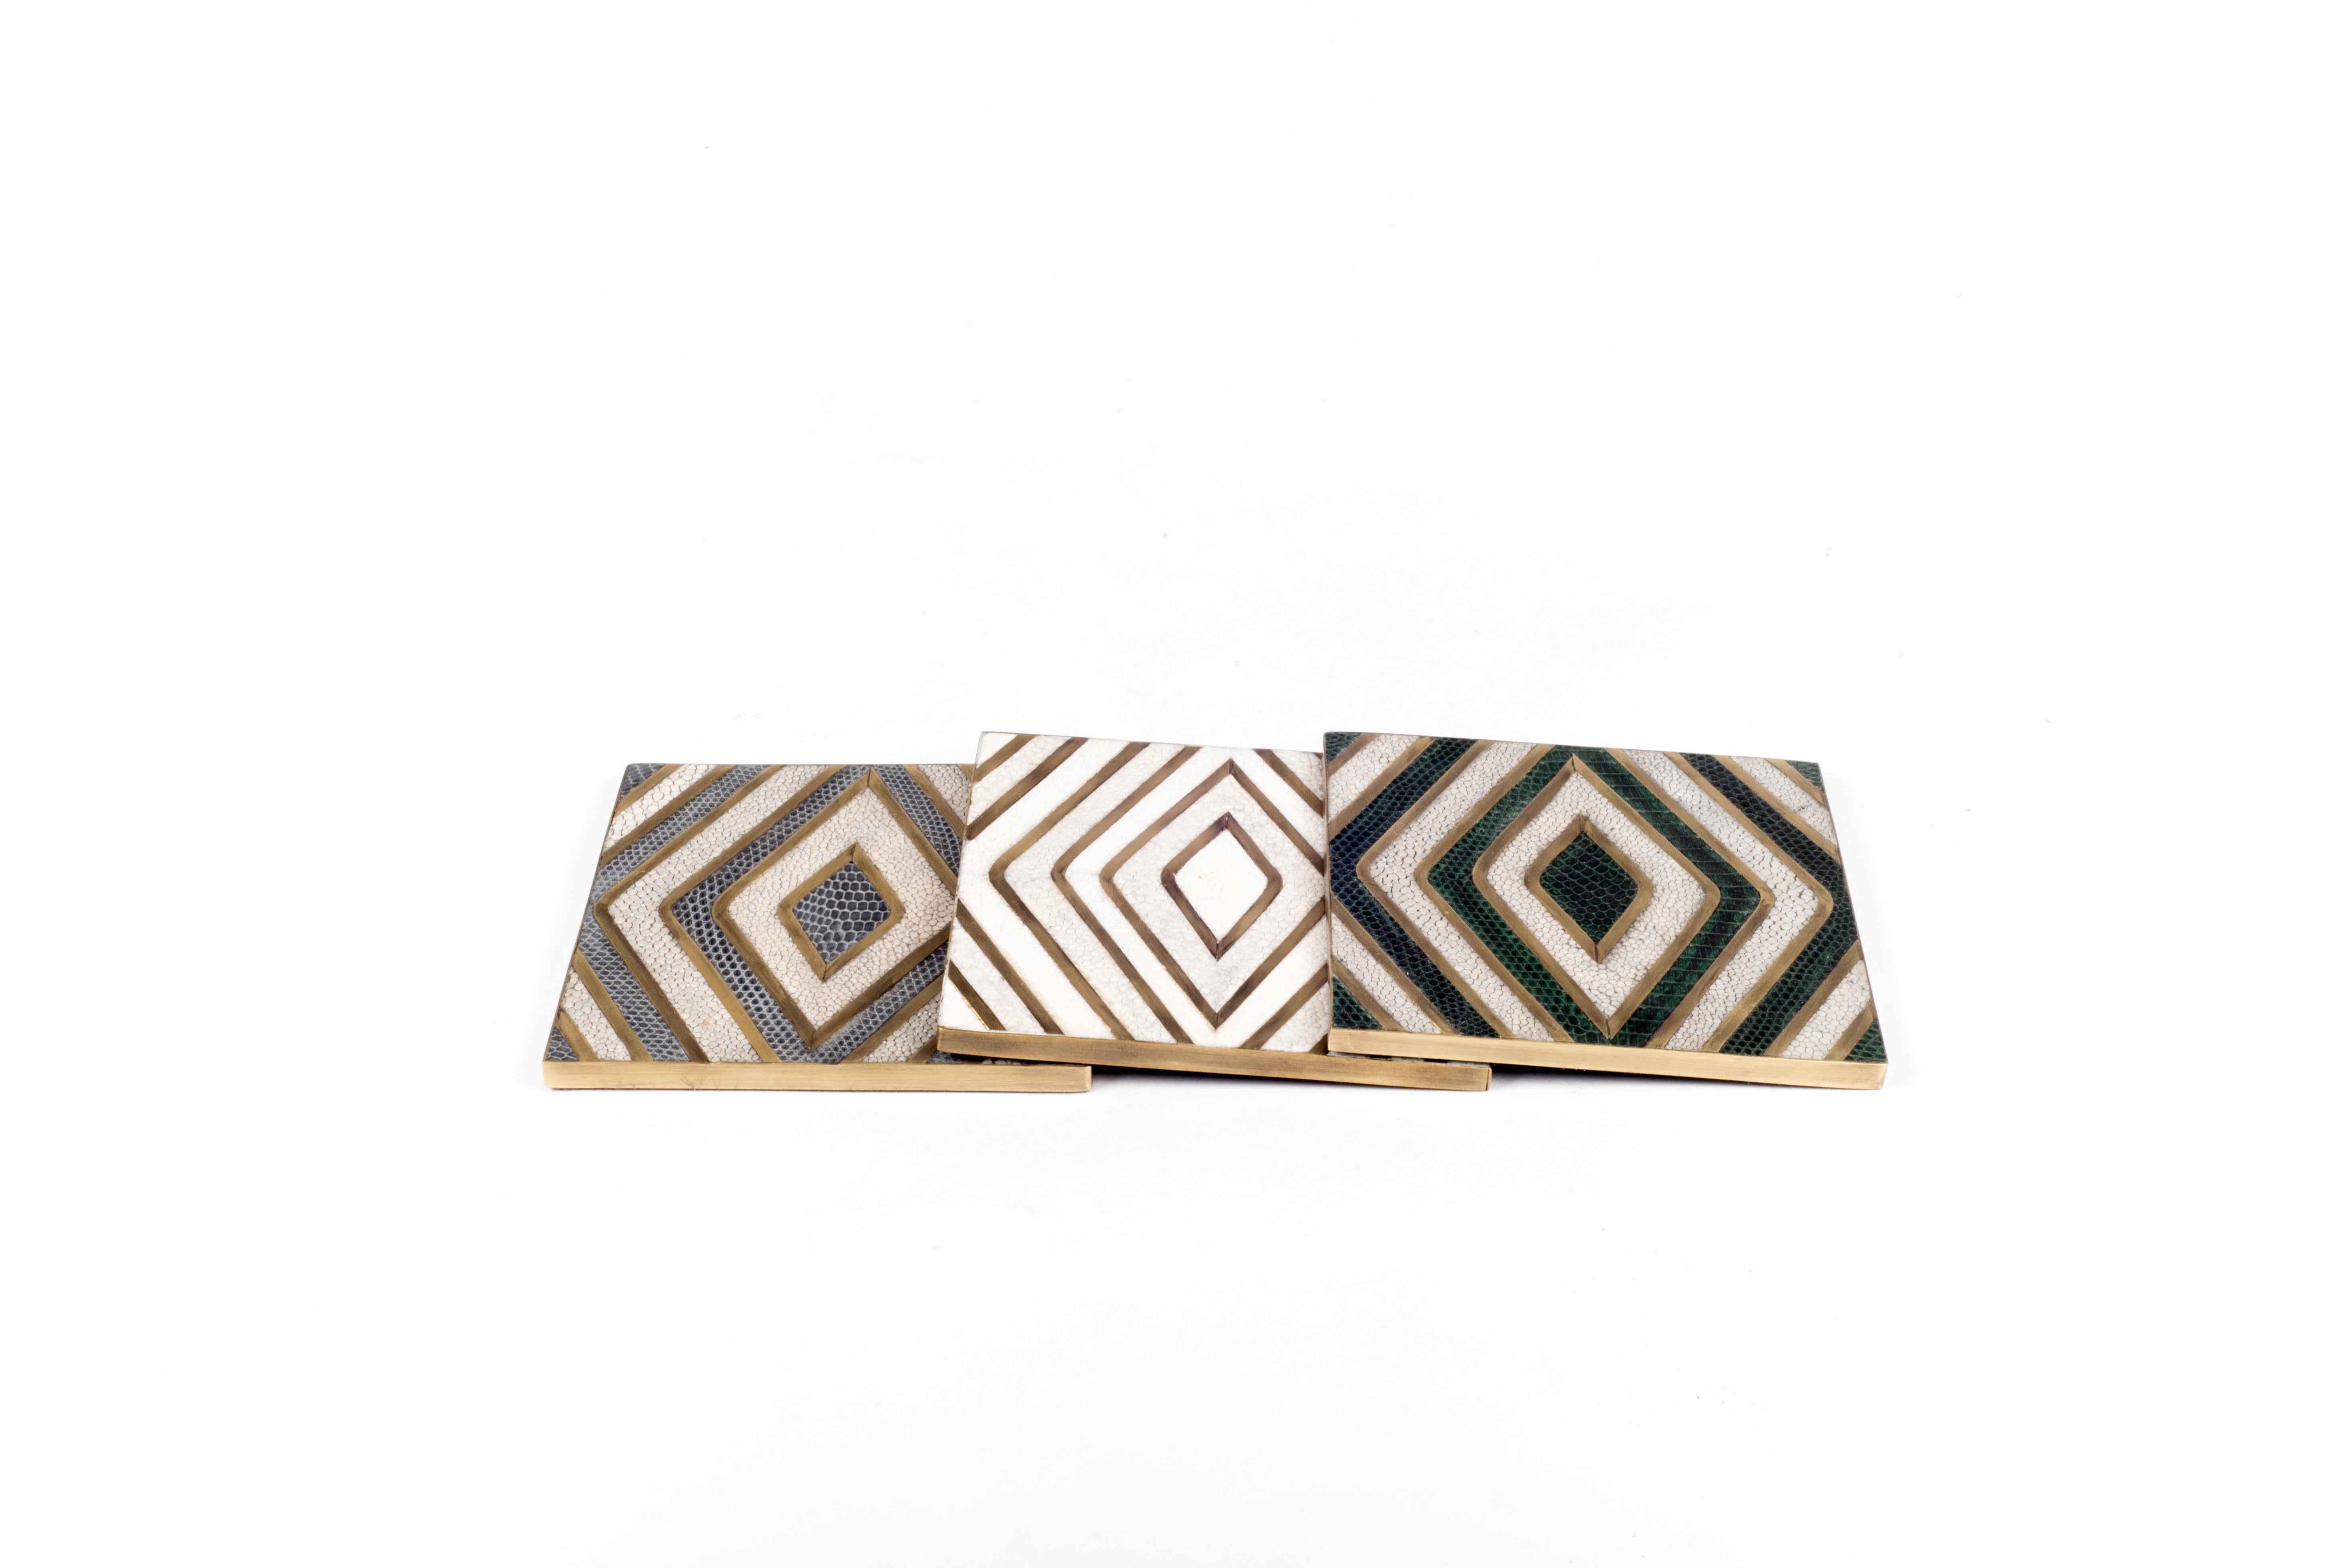 Hand-Crafted Set of 4 Geometric Coasters Inlaid in Shagreen, Shell and Brass by Kifu Paris For Sale